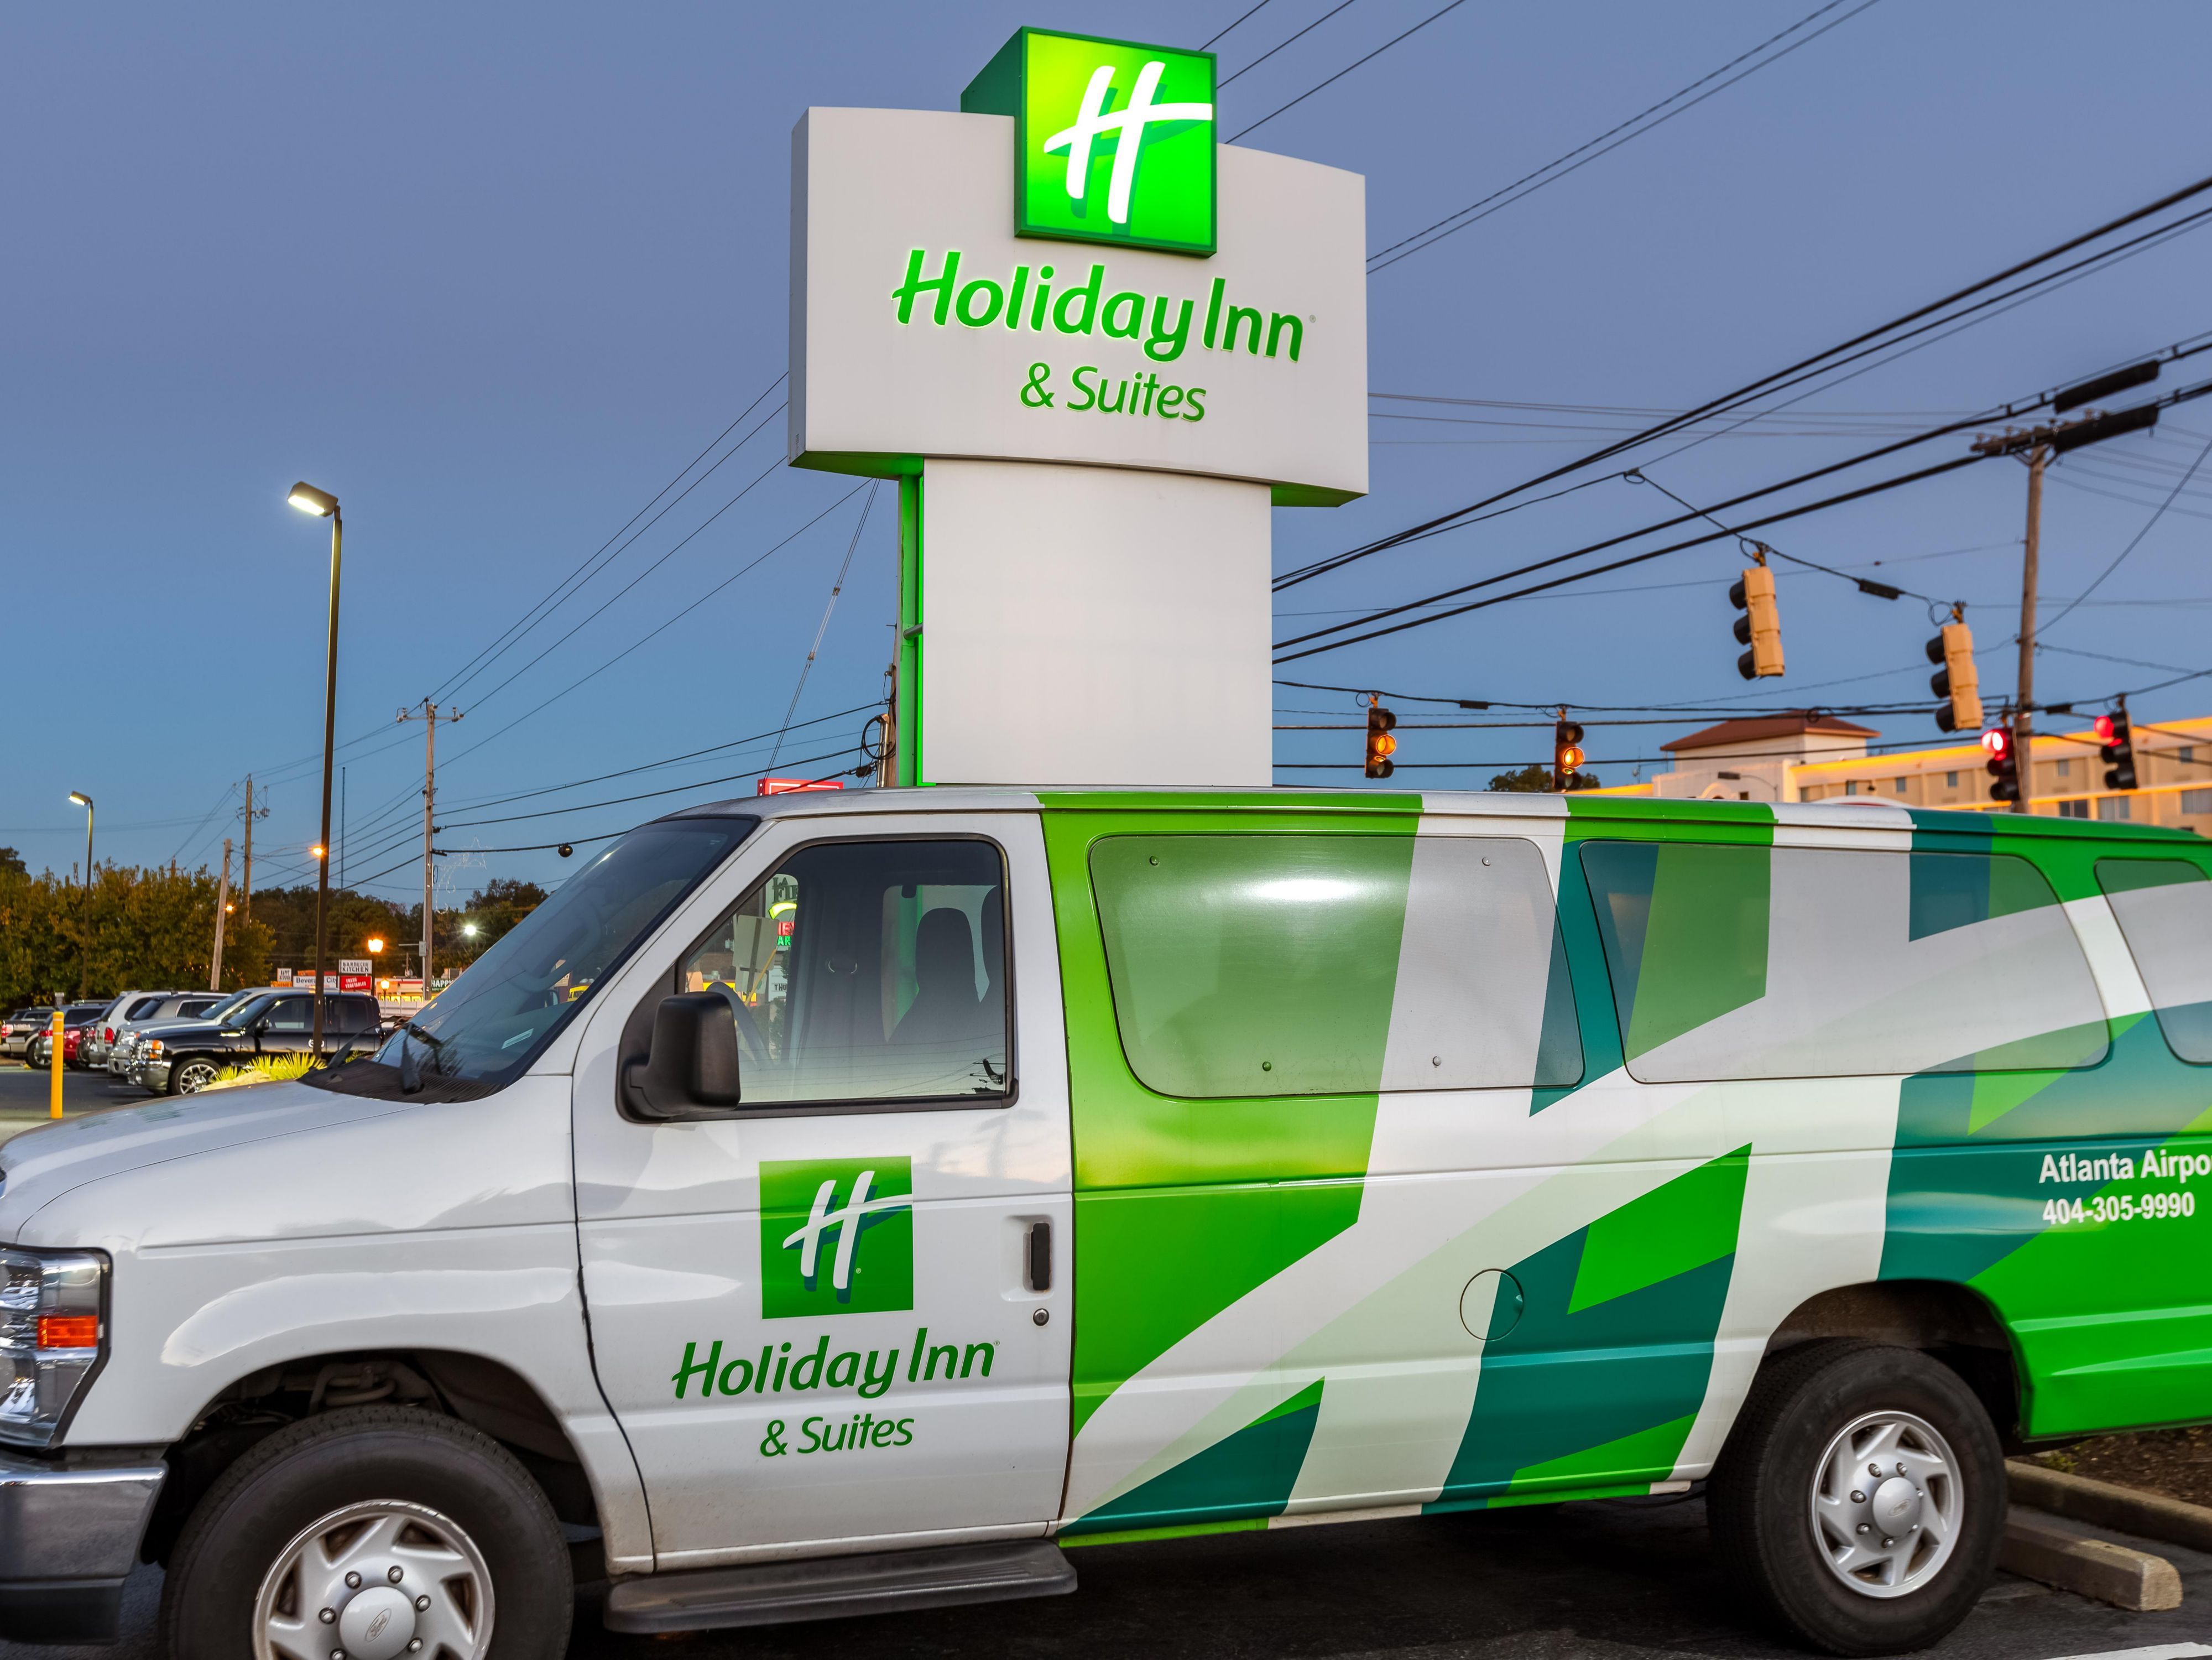 Located just minutes from the Hartsfield-Jackson International Airport, Holiday Inn and Suites Atlanta North is a great place to stay for business or leisure. We offer free airport shuttle service as well as many other amenities.